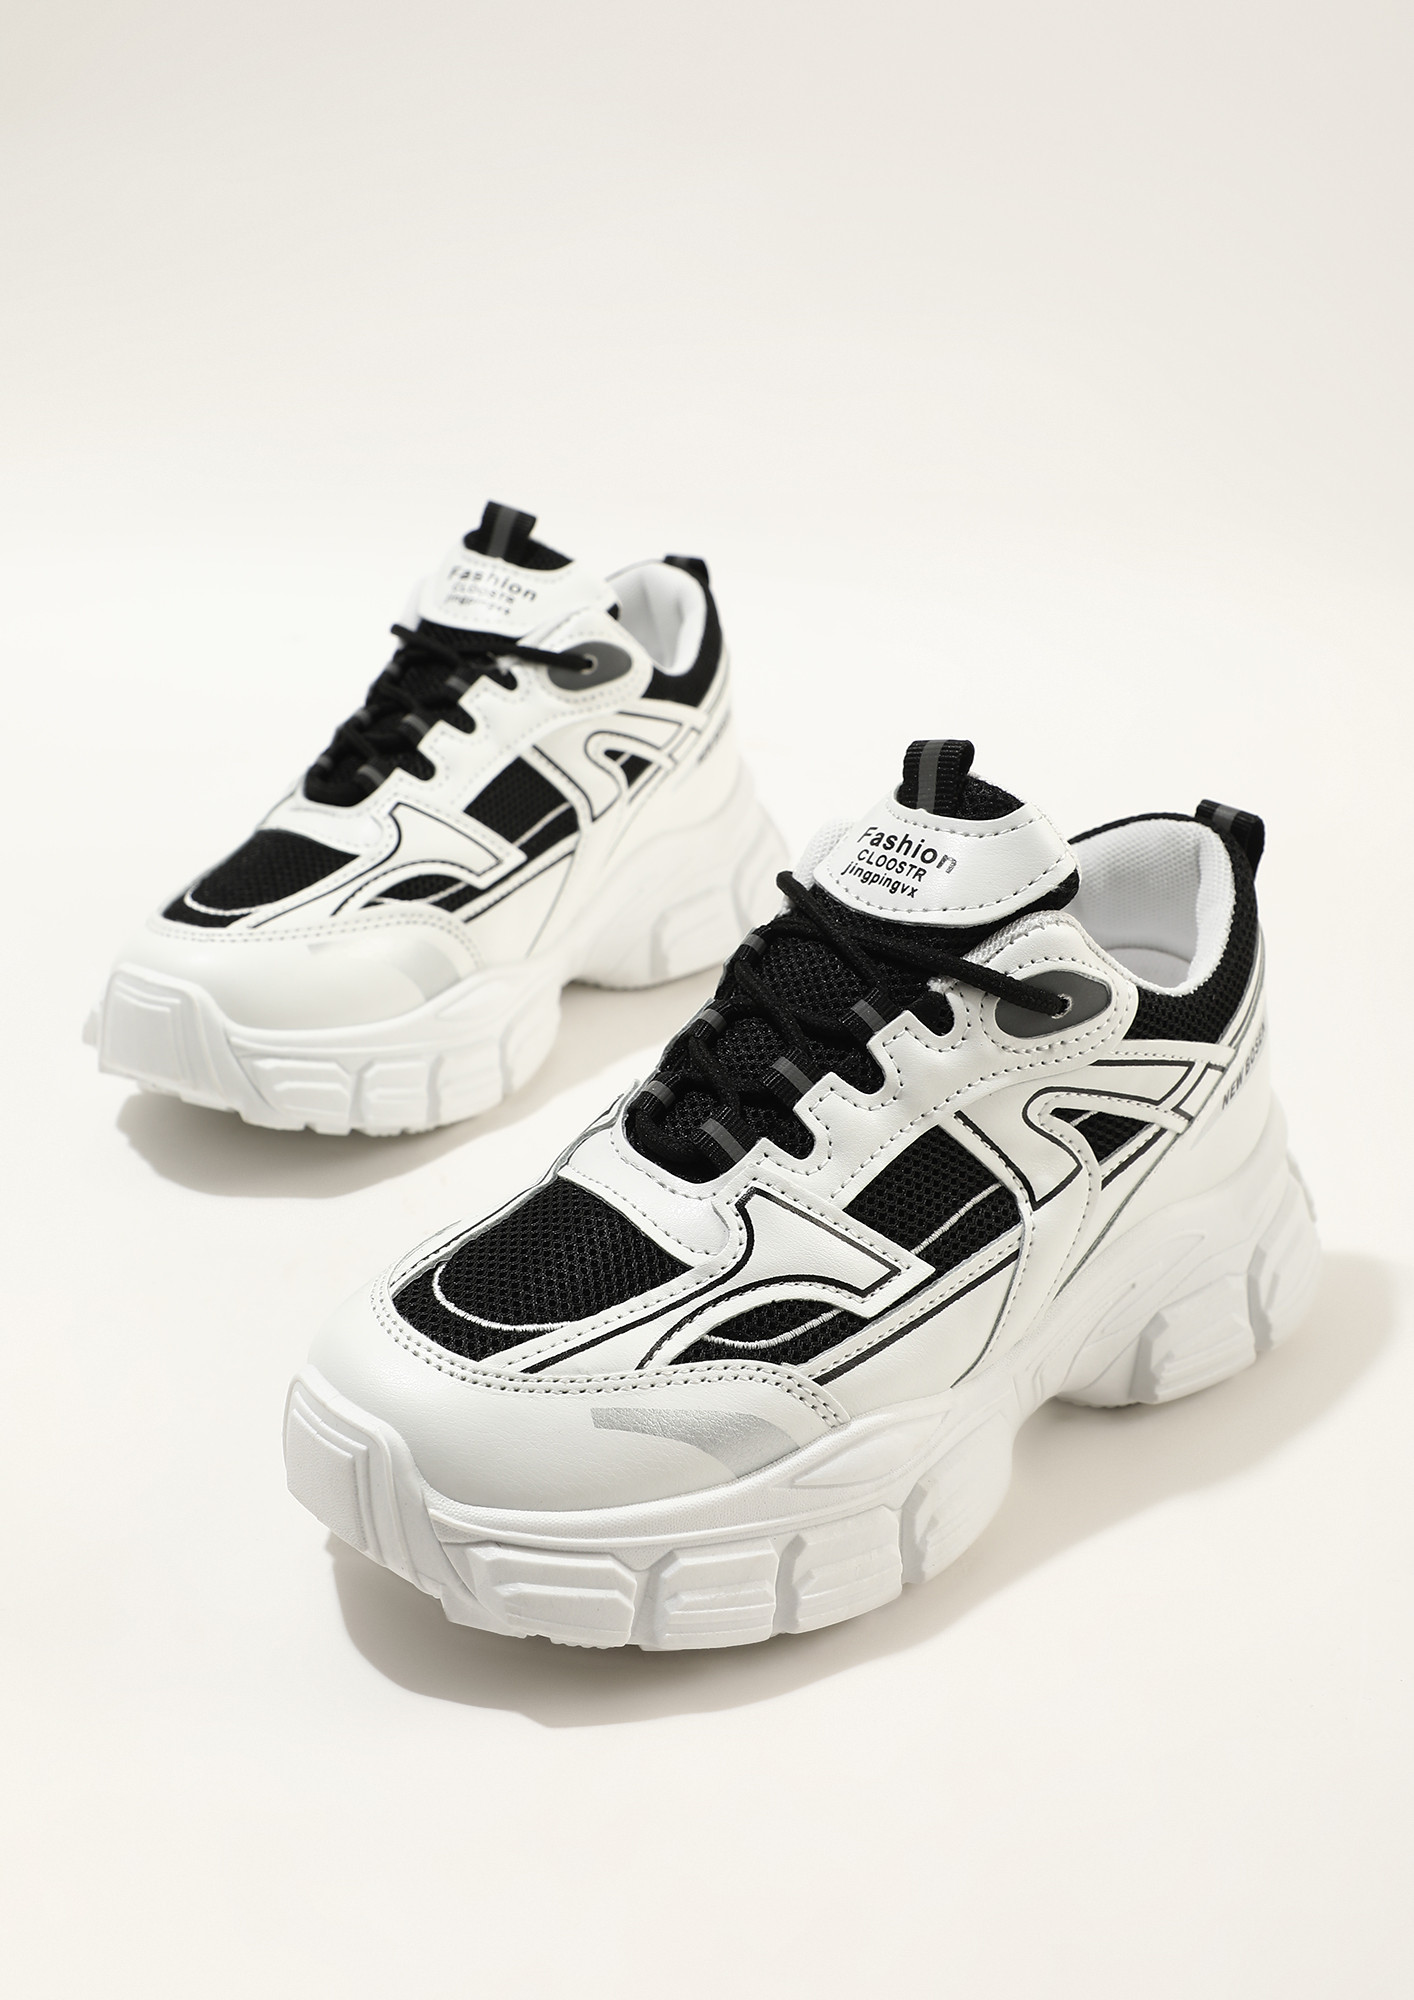 Women Two Tone Lace-up Front Sneakers Fashion Black And White